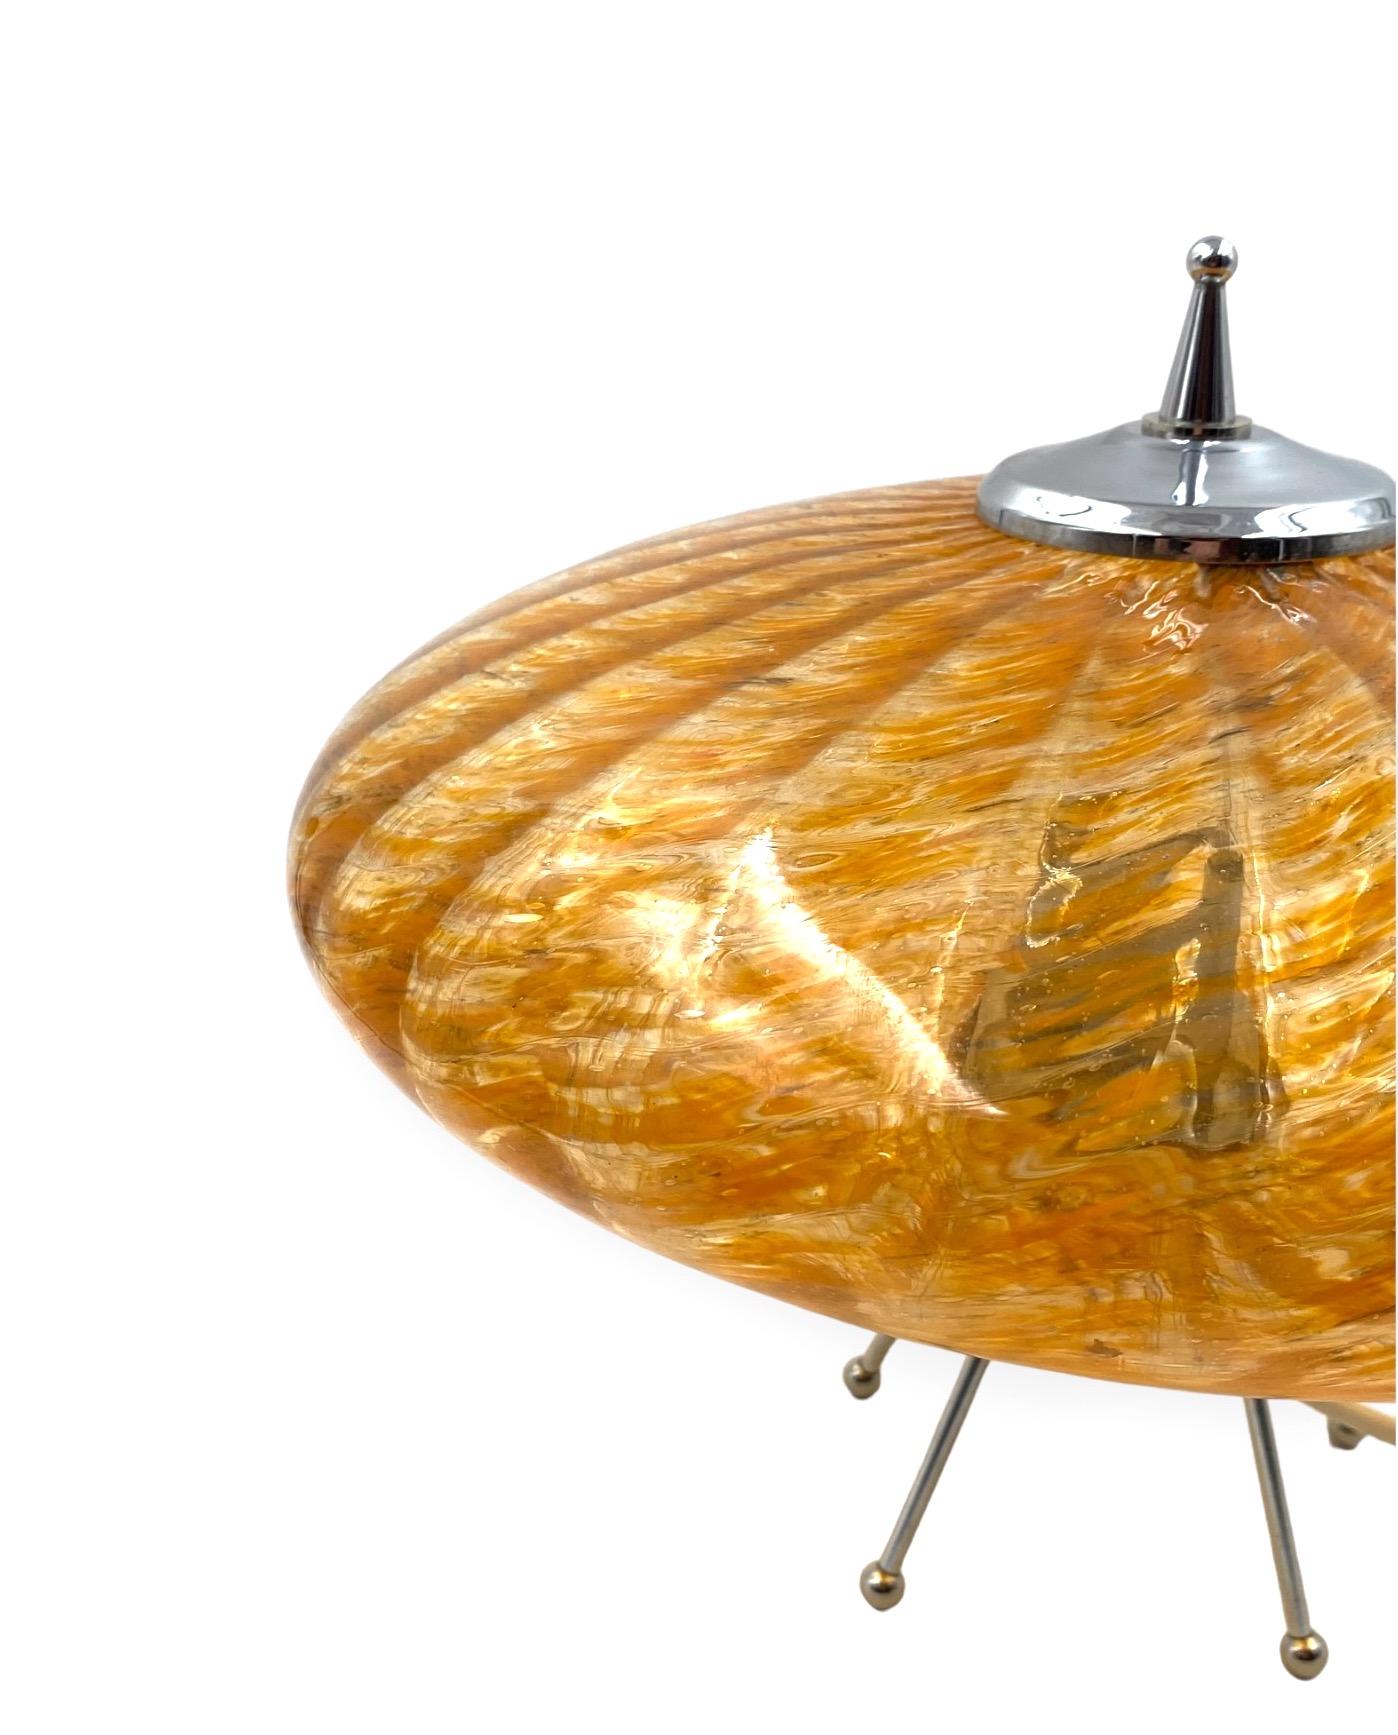 Murano orange glass flying saucer Ufo table lamp, Murano Italy 1970s For Sale 8